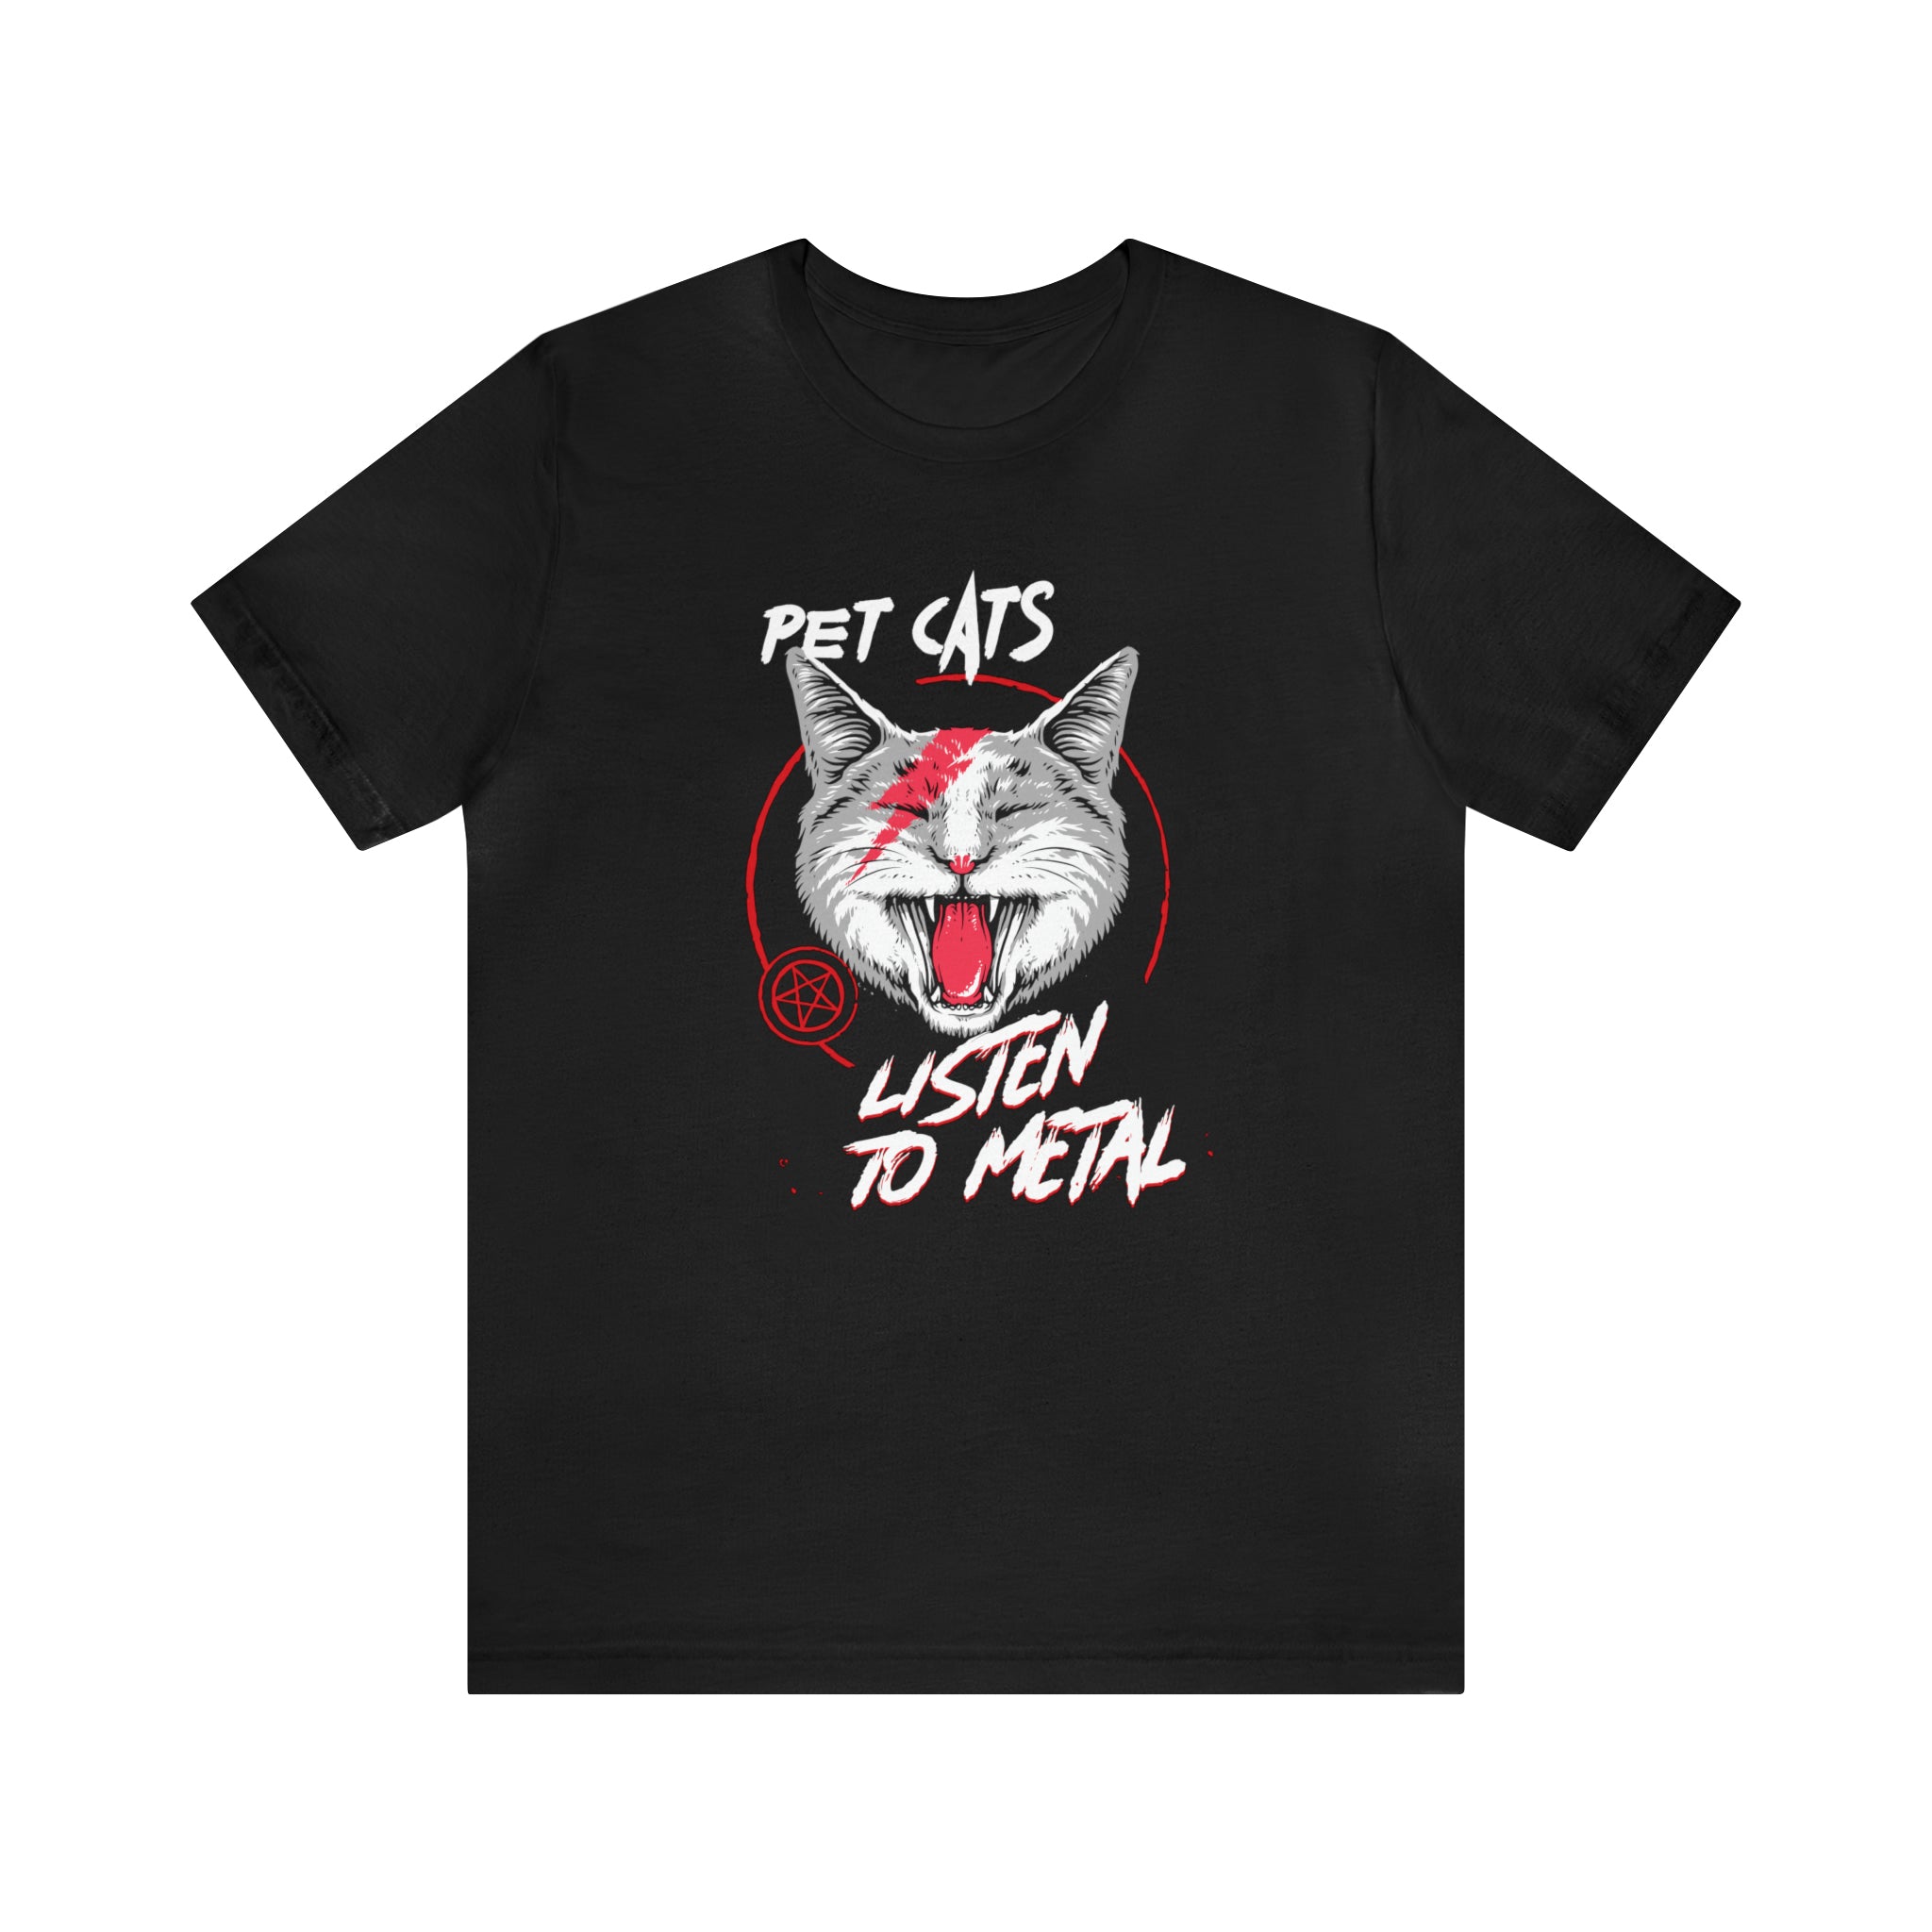 Custom Pet Cats Listen to Metal - Print on Both Sides : Unisex 100% Comfy Cotton T-Shirt by Bella+Canvas